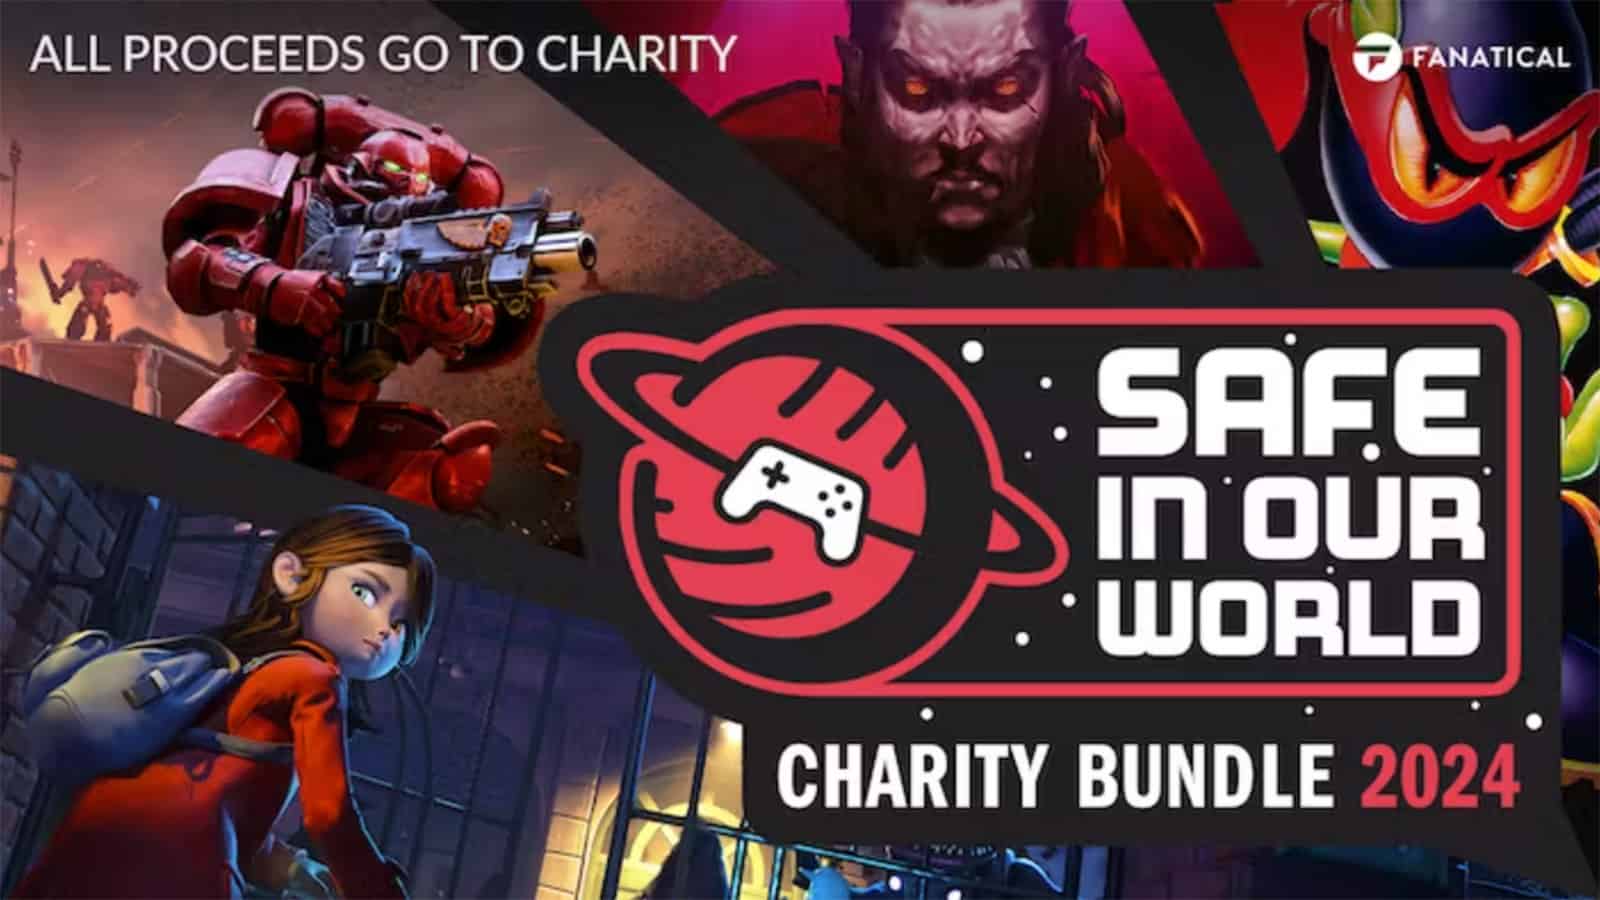 Safe In Our World Fanatical Charity Bundle